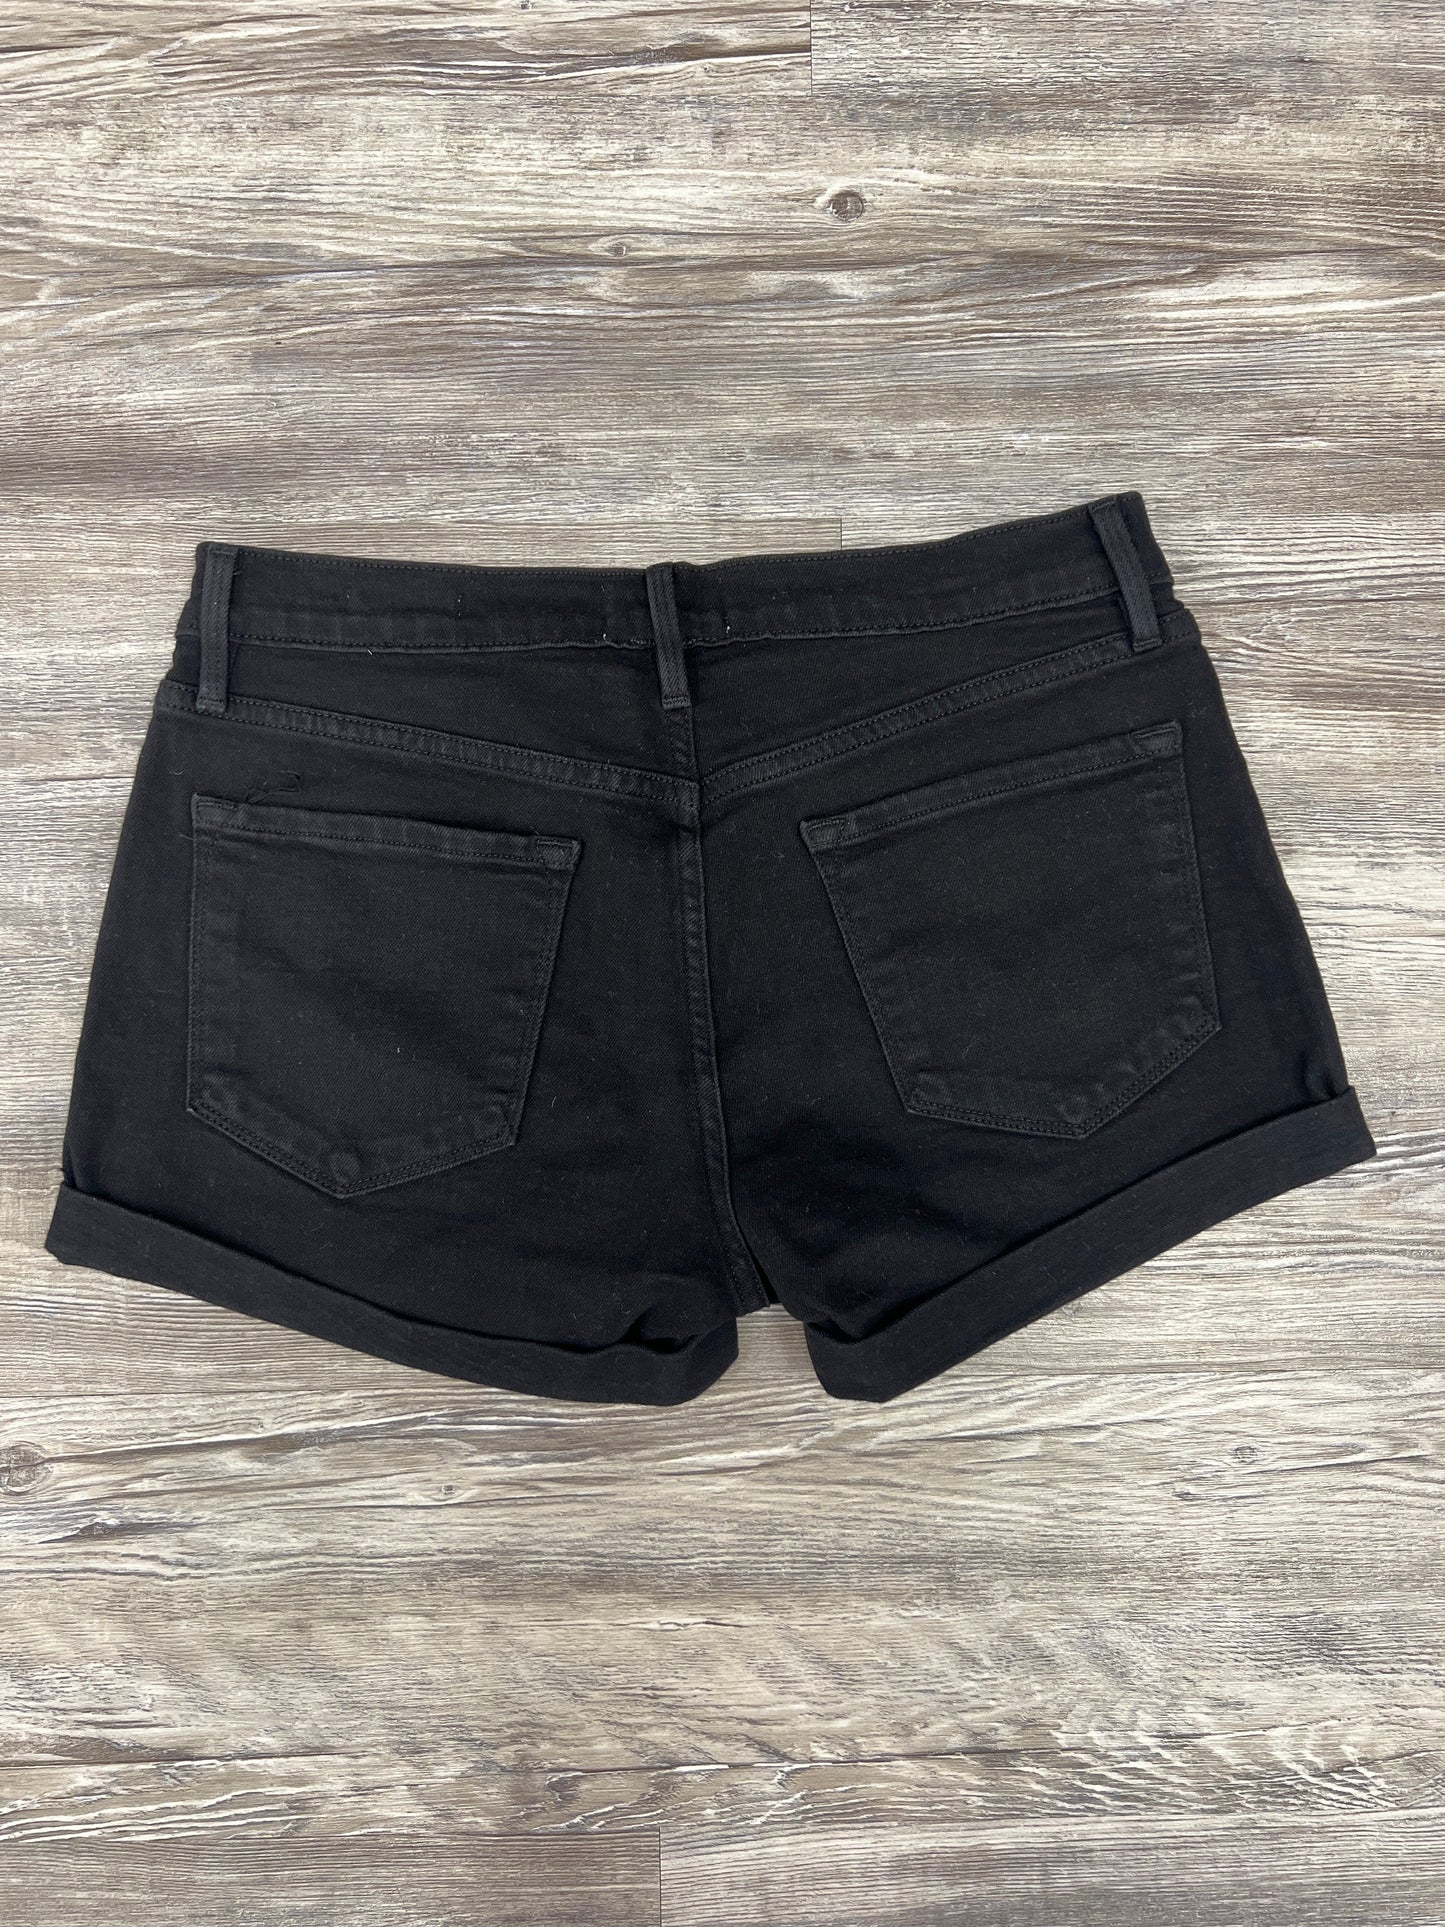 Shorts By Frame Size: 4